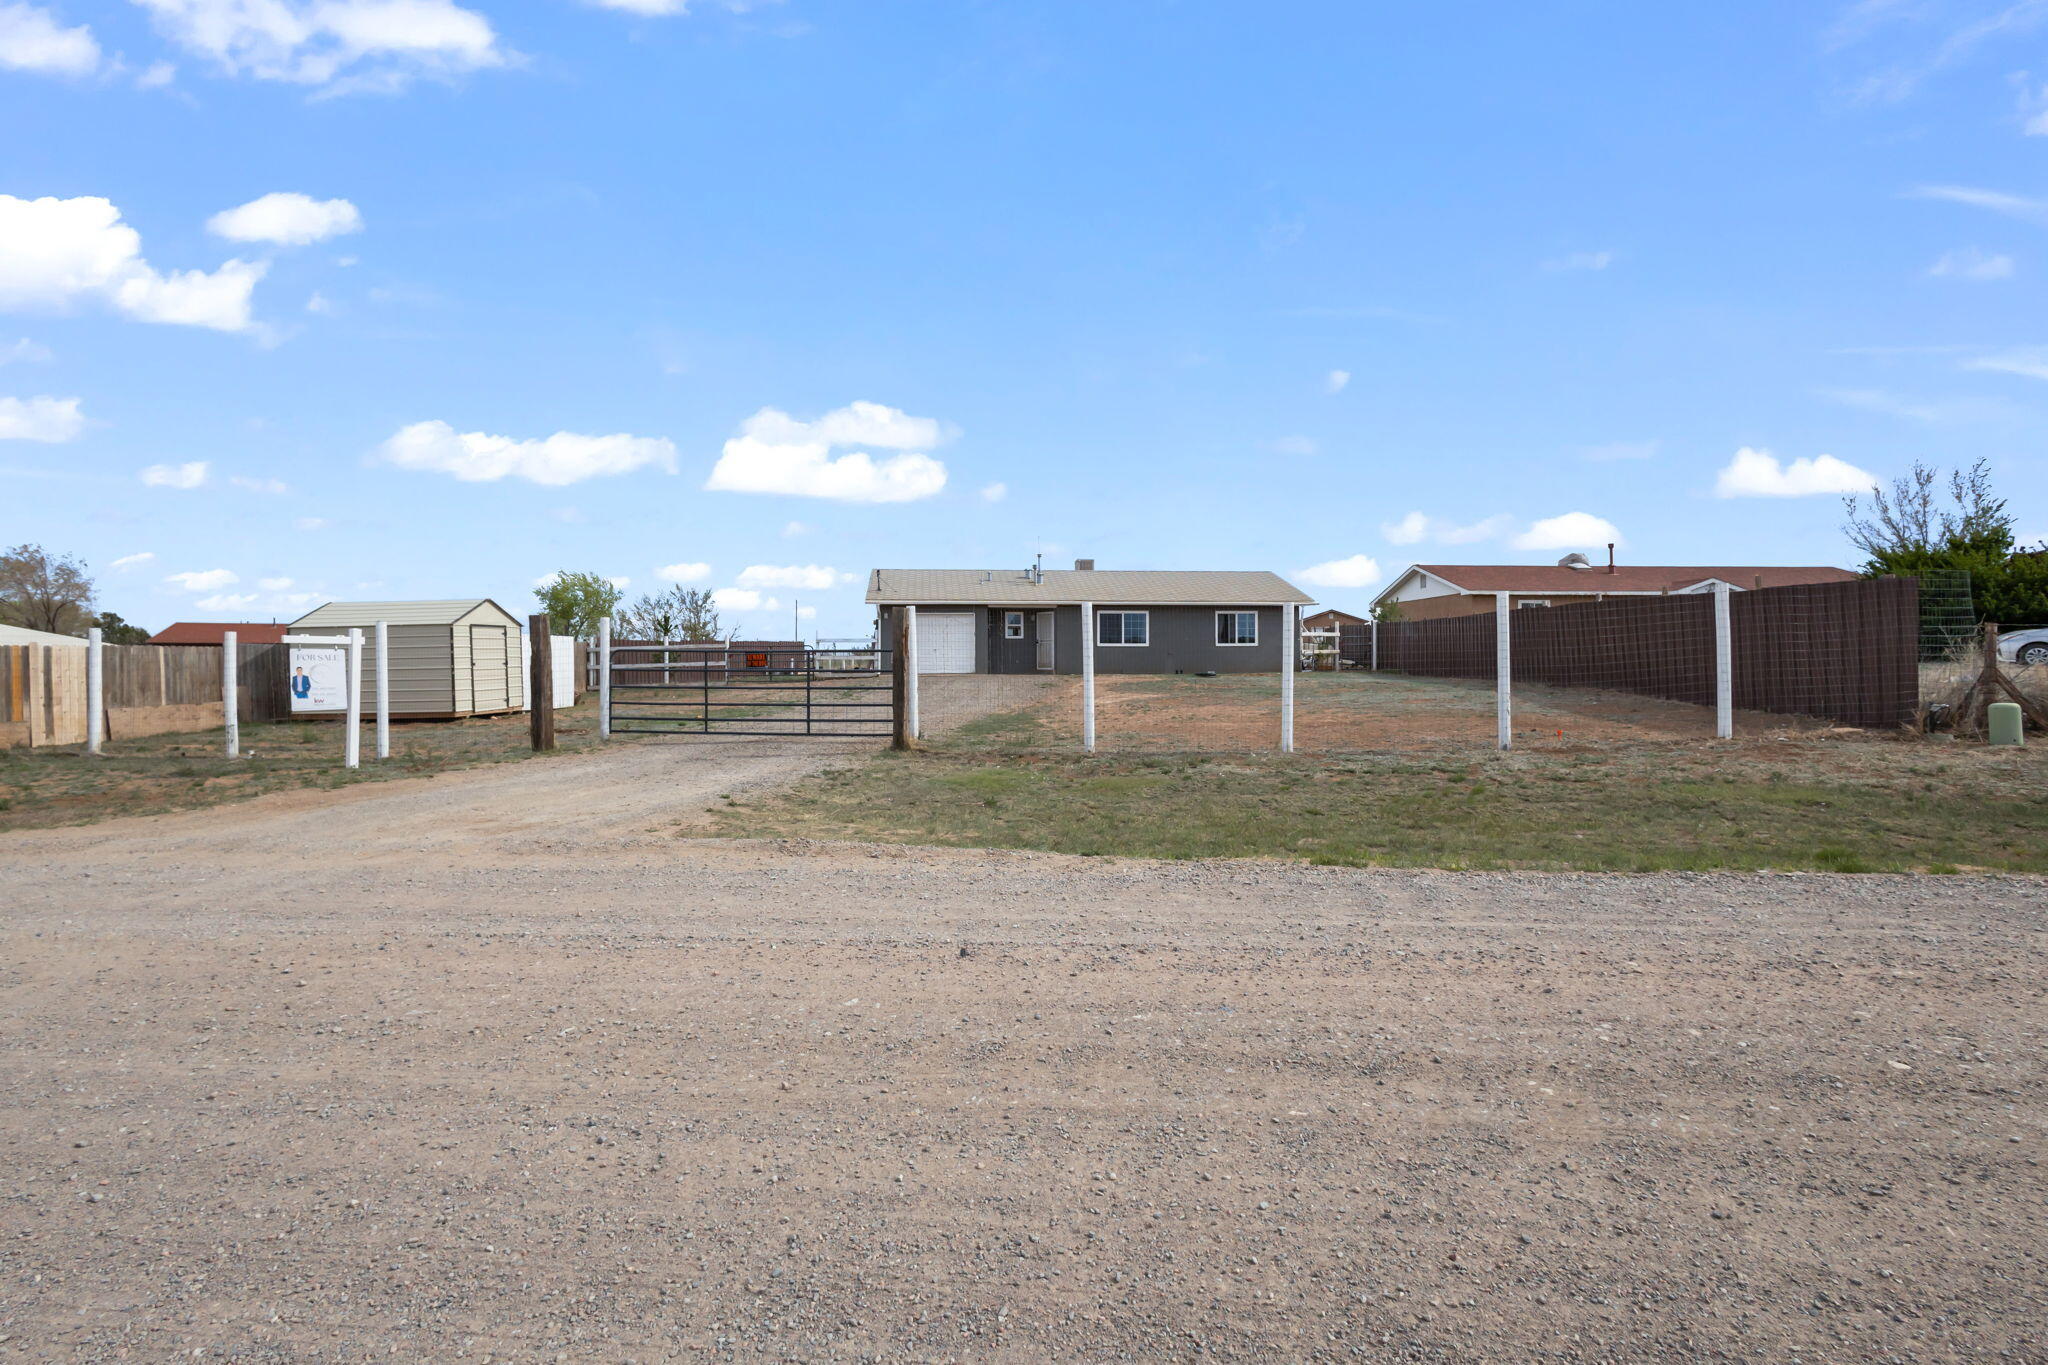 31 Roberts Drive, Edgewood, New Mexico 87015, 2 Bedrooms Bedrooms, ,1 BathroomBathrooms,Residential,For Sale,31 Roberts Drive,1061527